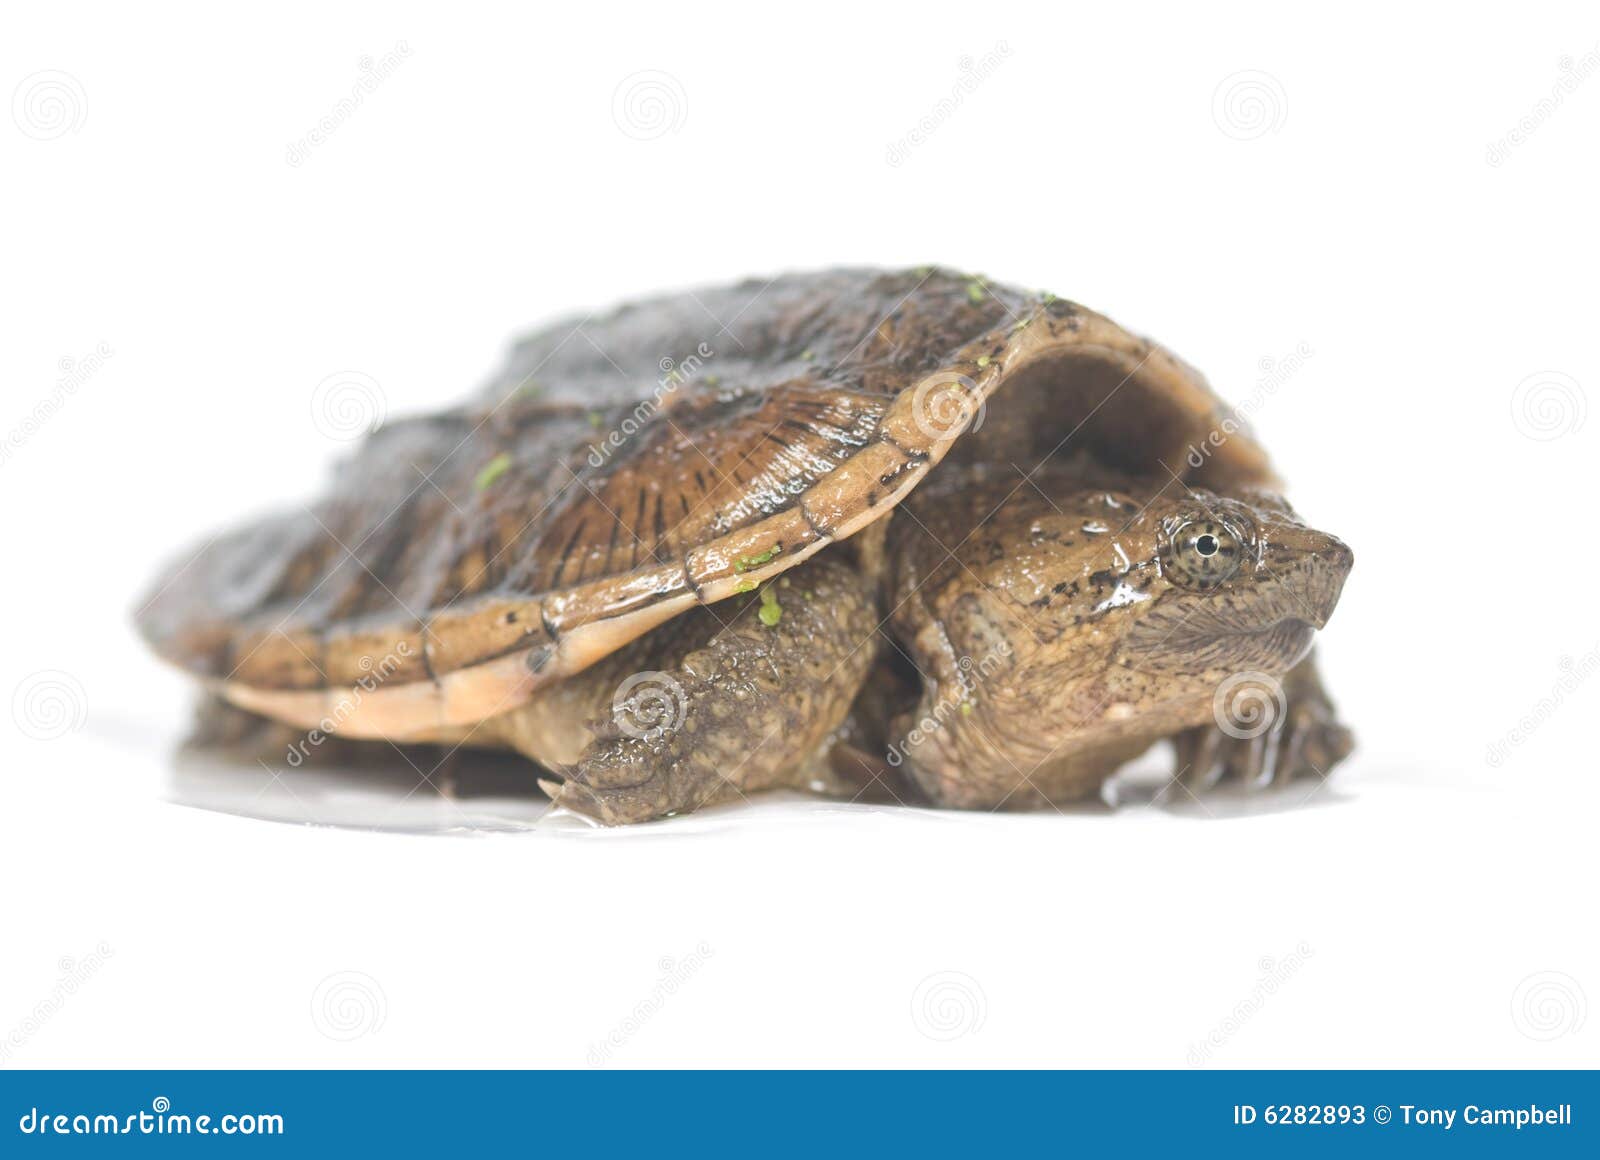 Baby snapping turtle stock image. Image of reptile, wildlife - 6282893